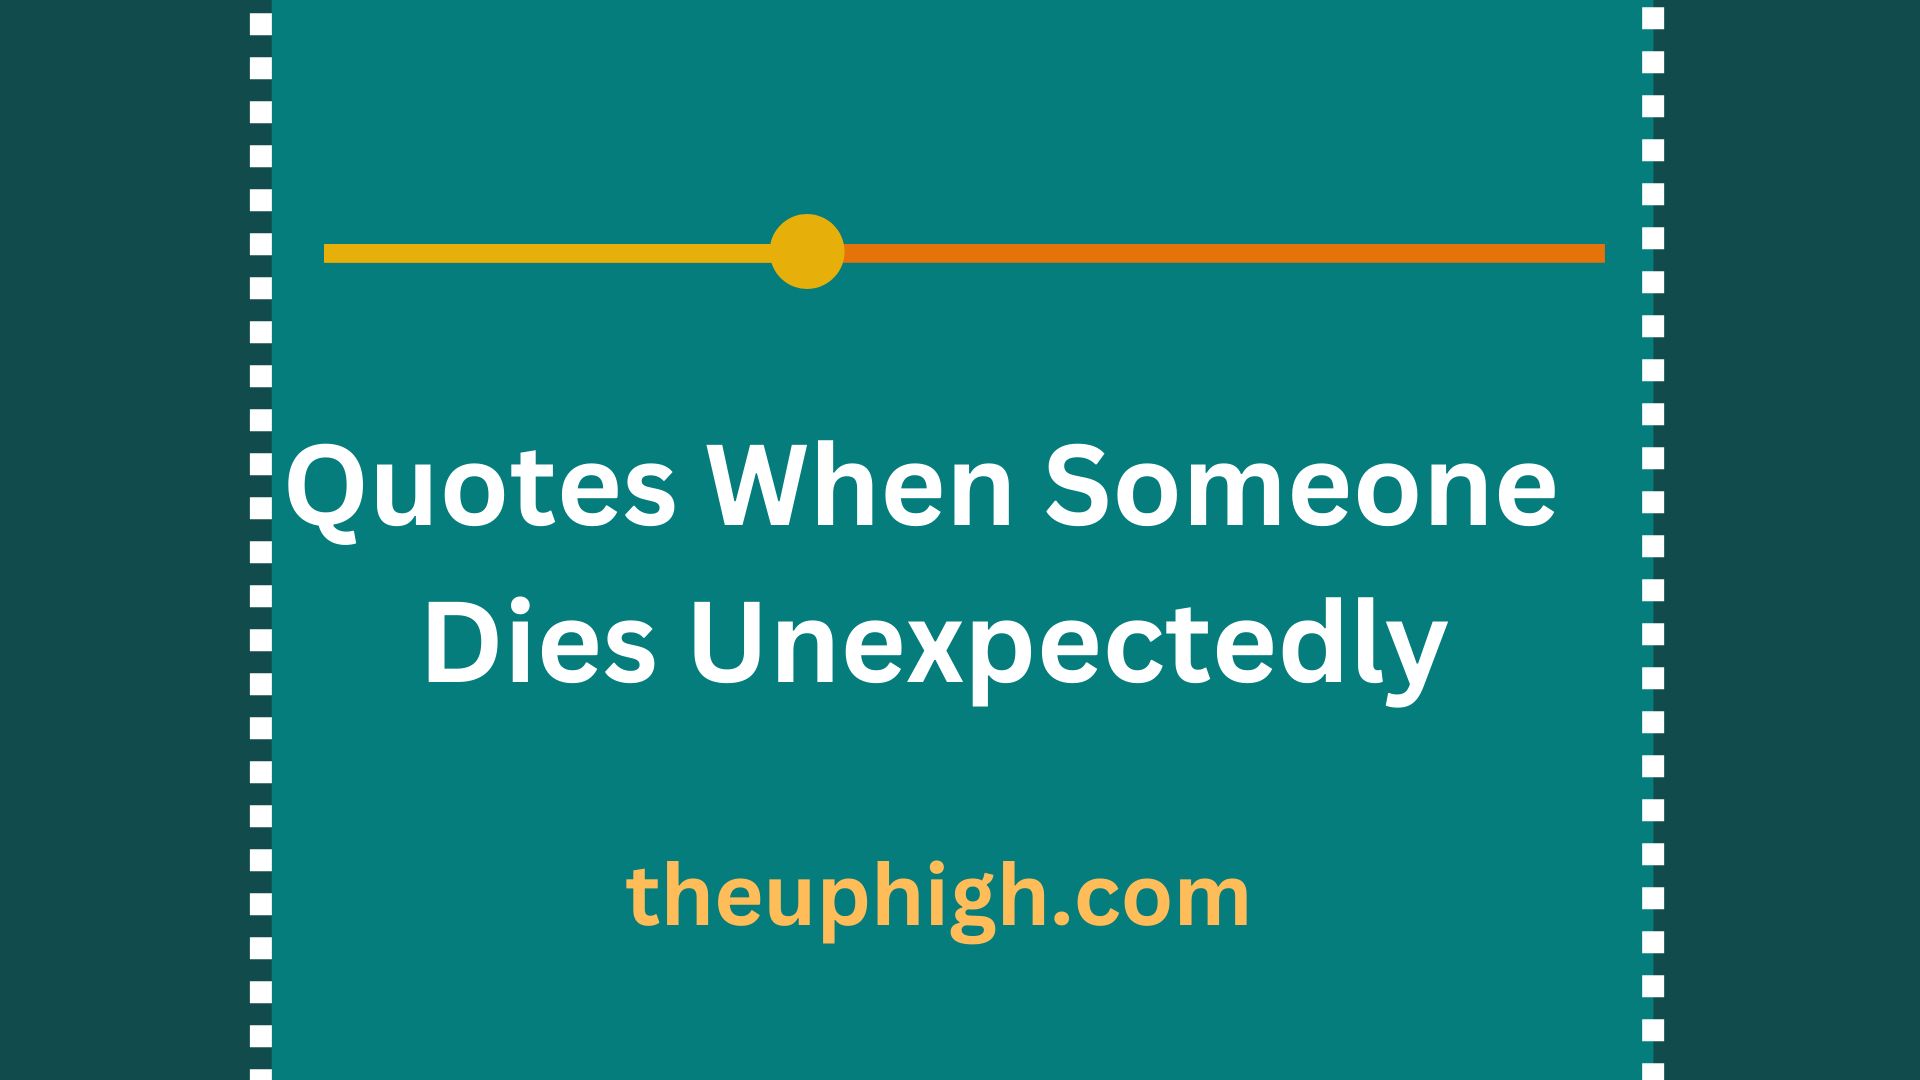 Quotes When Someone Dies Unexpectedly